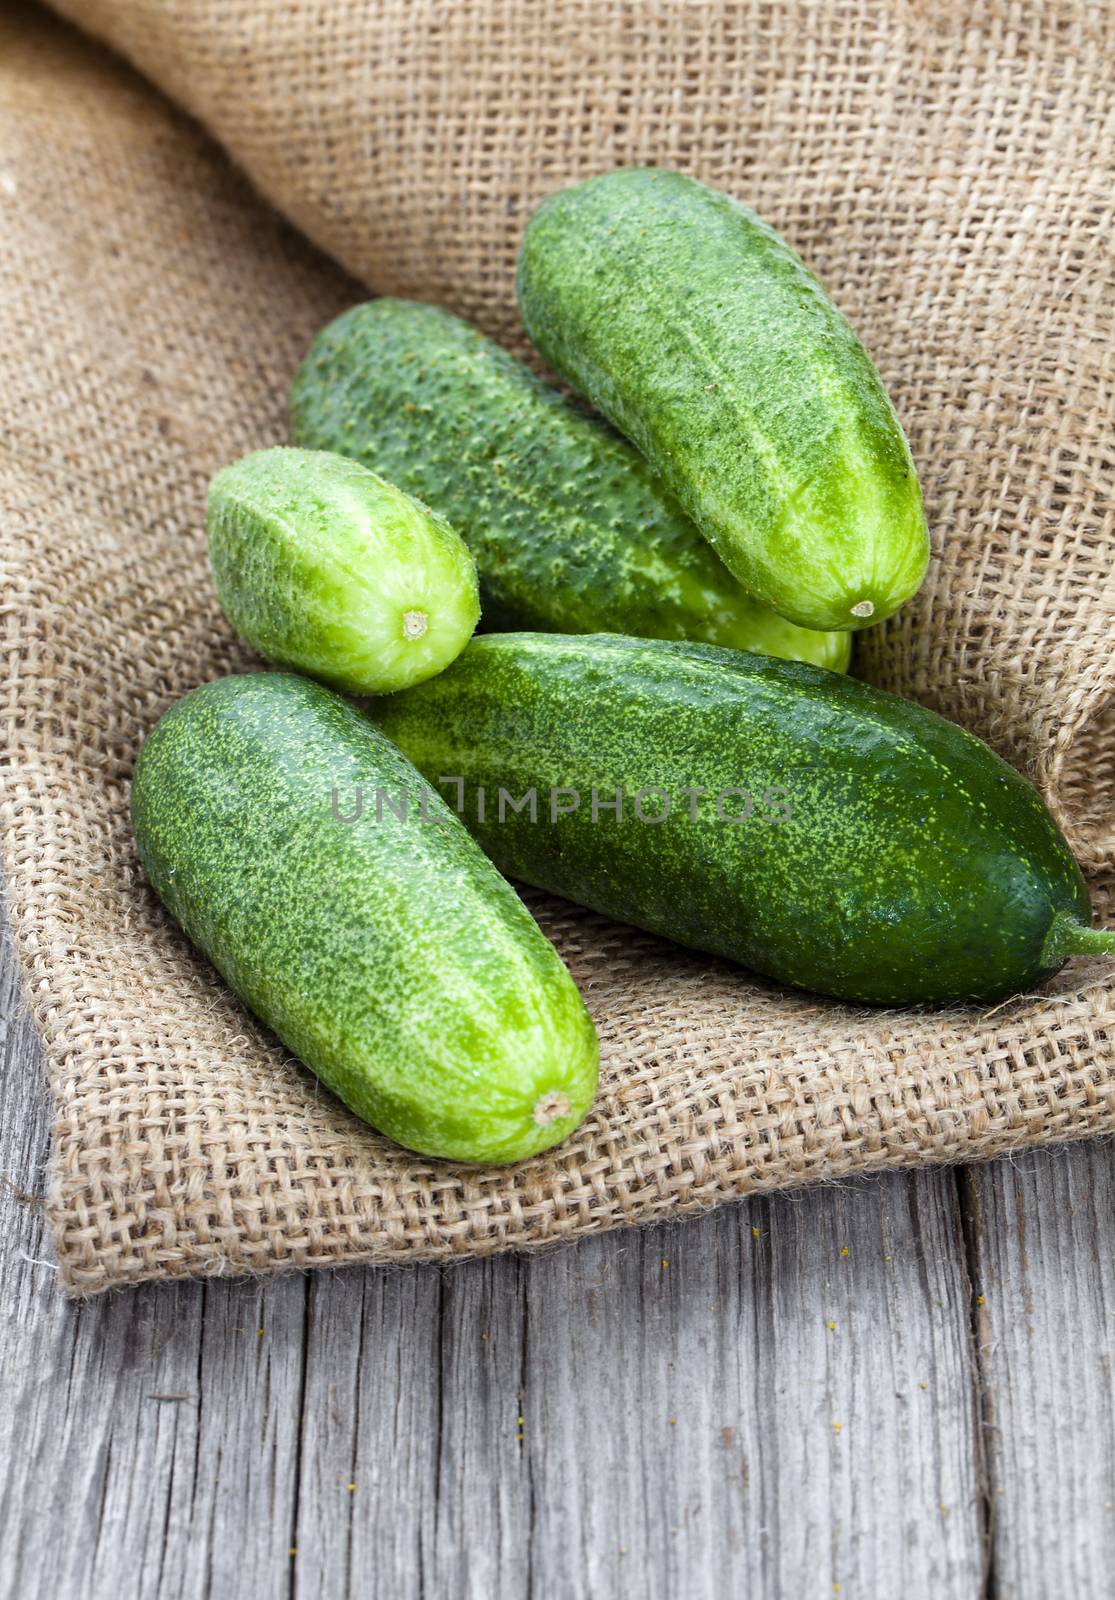 cucumbers on the wooden background